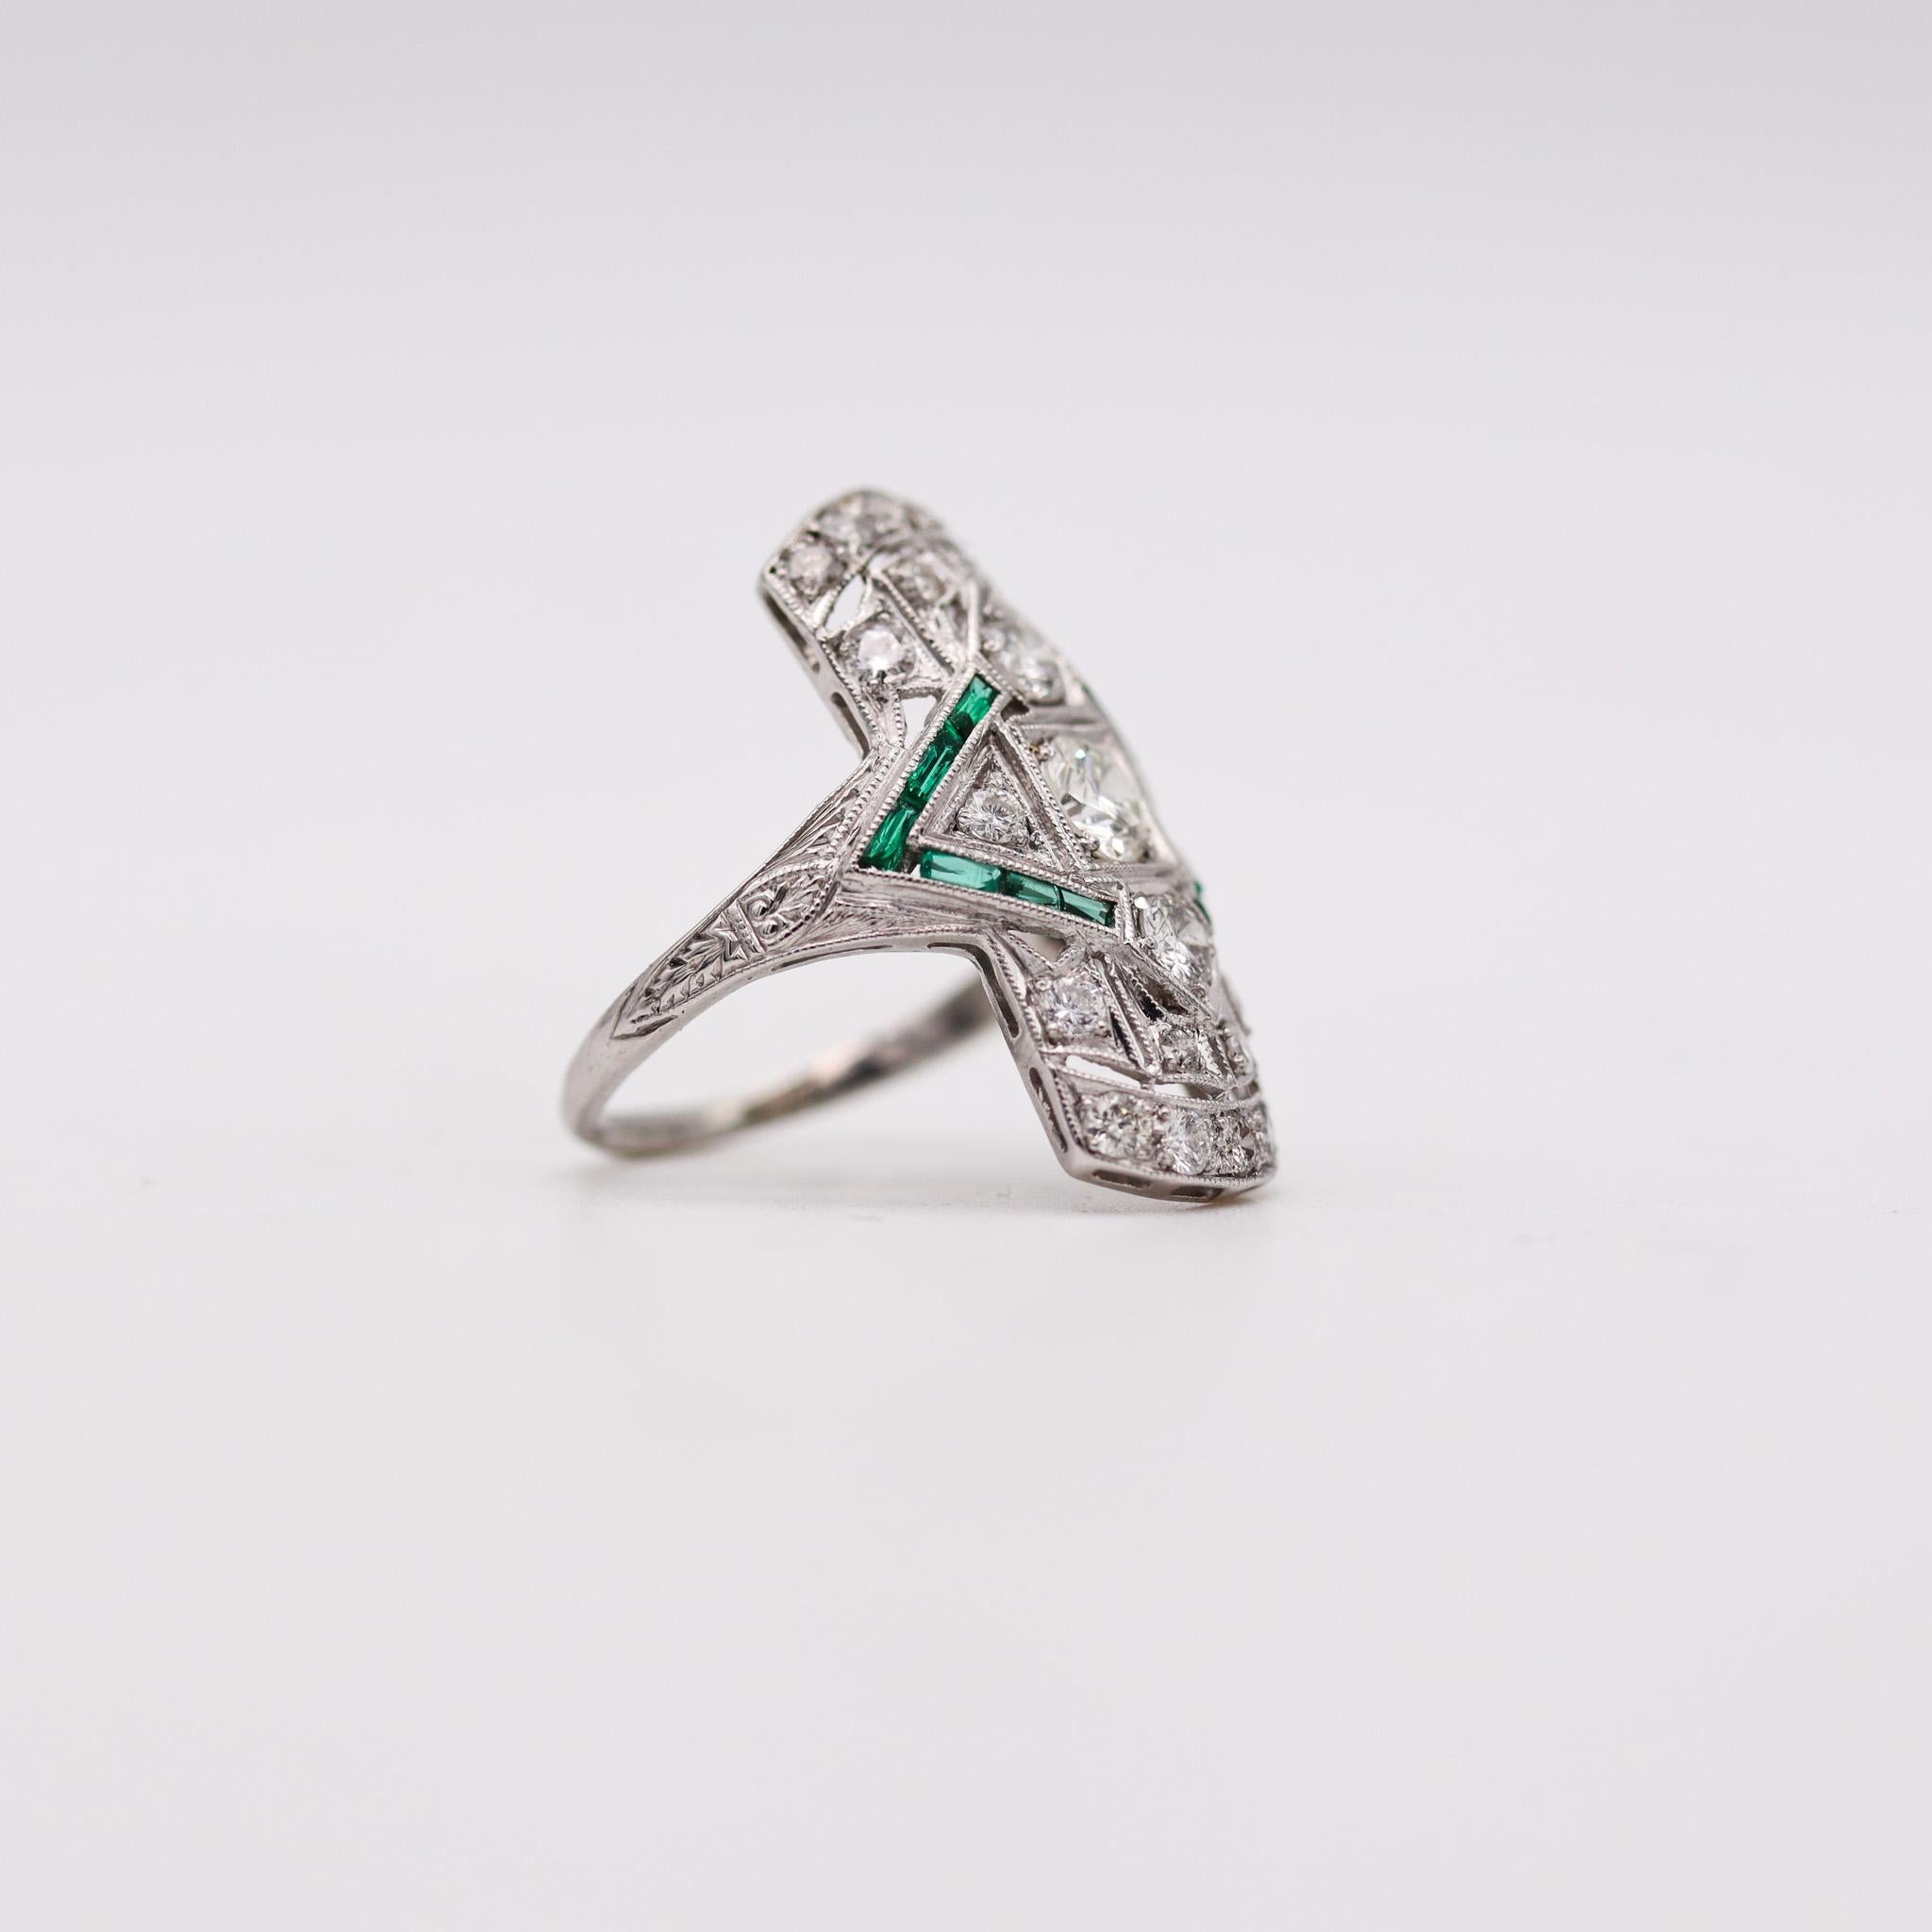 Round Cut Art Deco 1930 Cocktail Ring In Platinum With 1.55 Ctw In Diamonds And Emerald For Sale